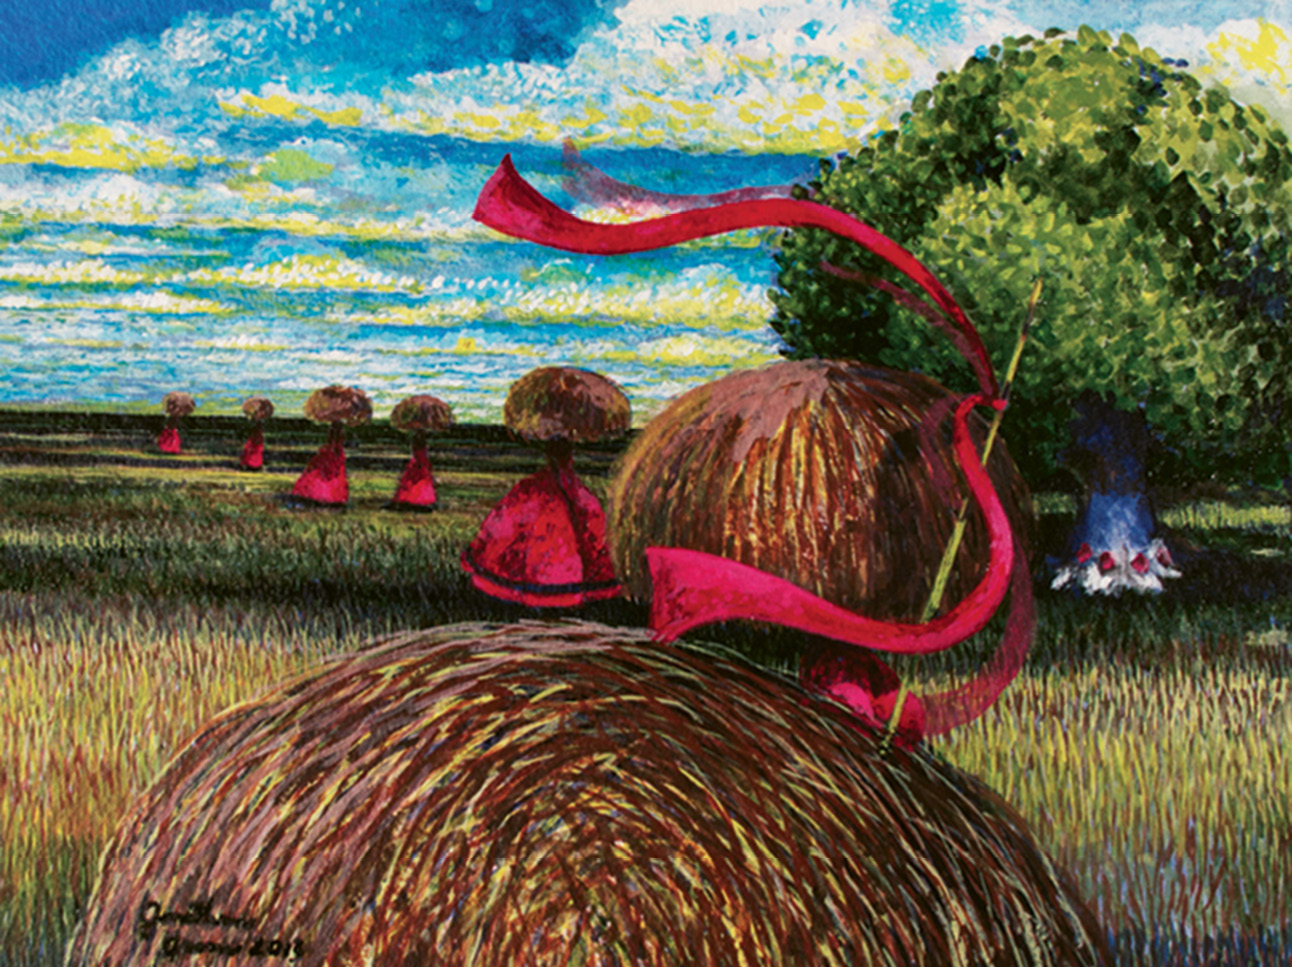 Rice Carriers (acrylic on watercolor, 11 X 14 1/2 inches, 2012)